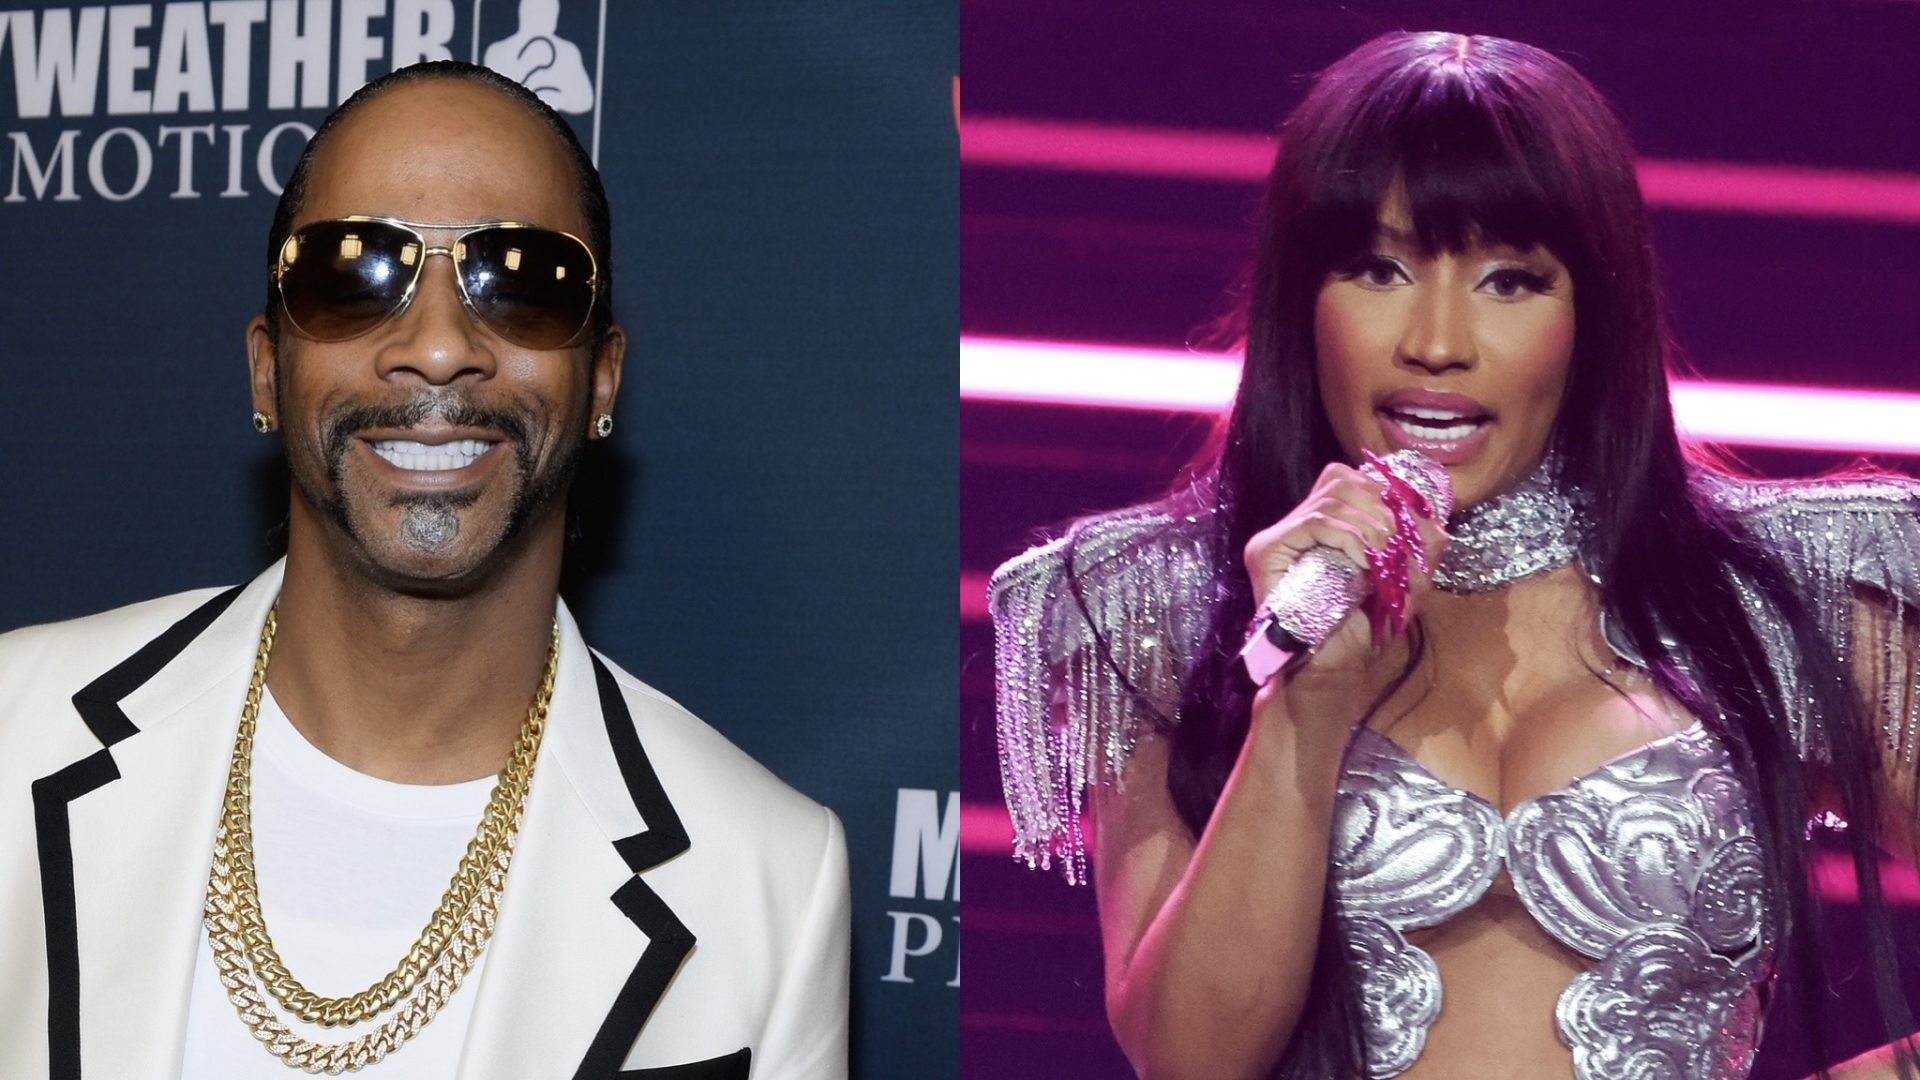 Hol’ Up! Katt Williams Responds After Nicki Minaj Shares Request For Him To Join Her On ‘Pink Friday 2’ World Tour (Video) thumbnail